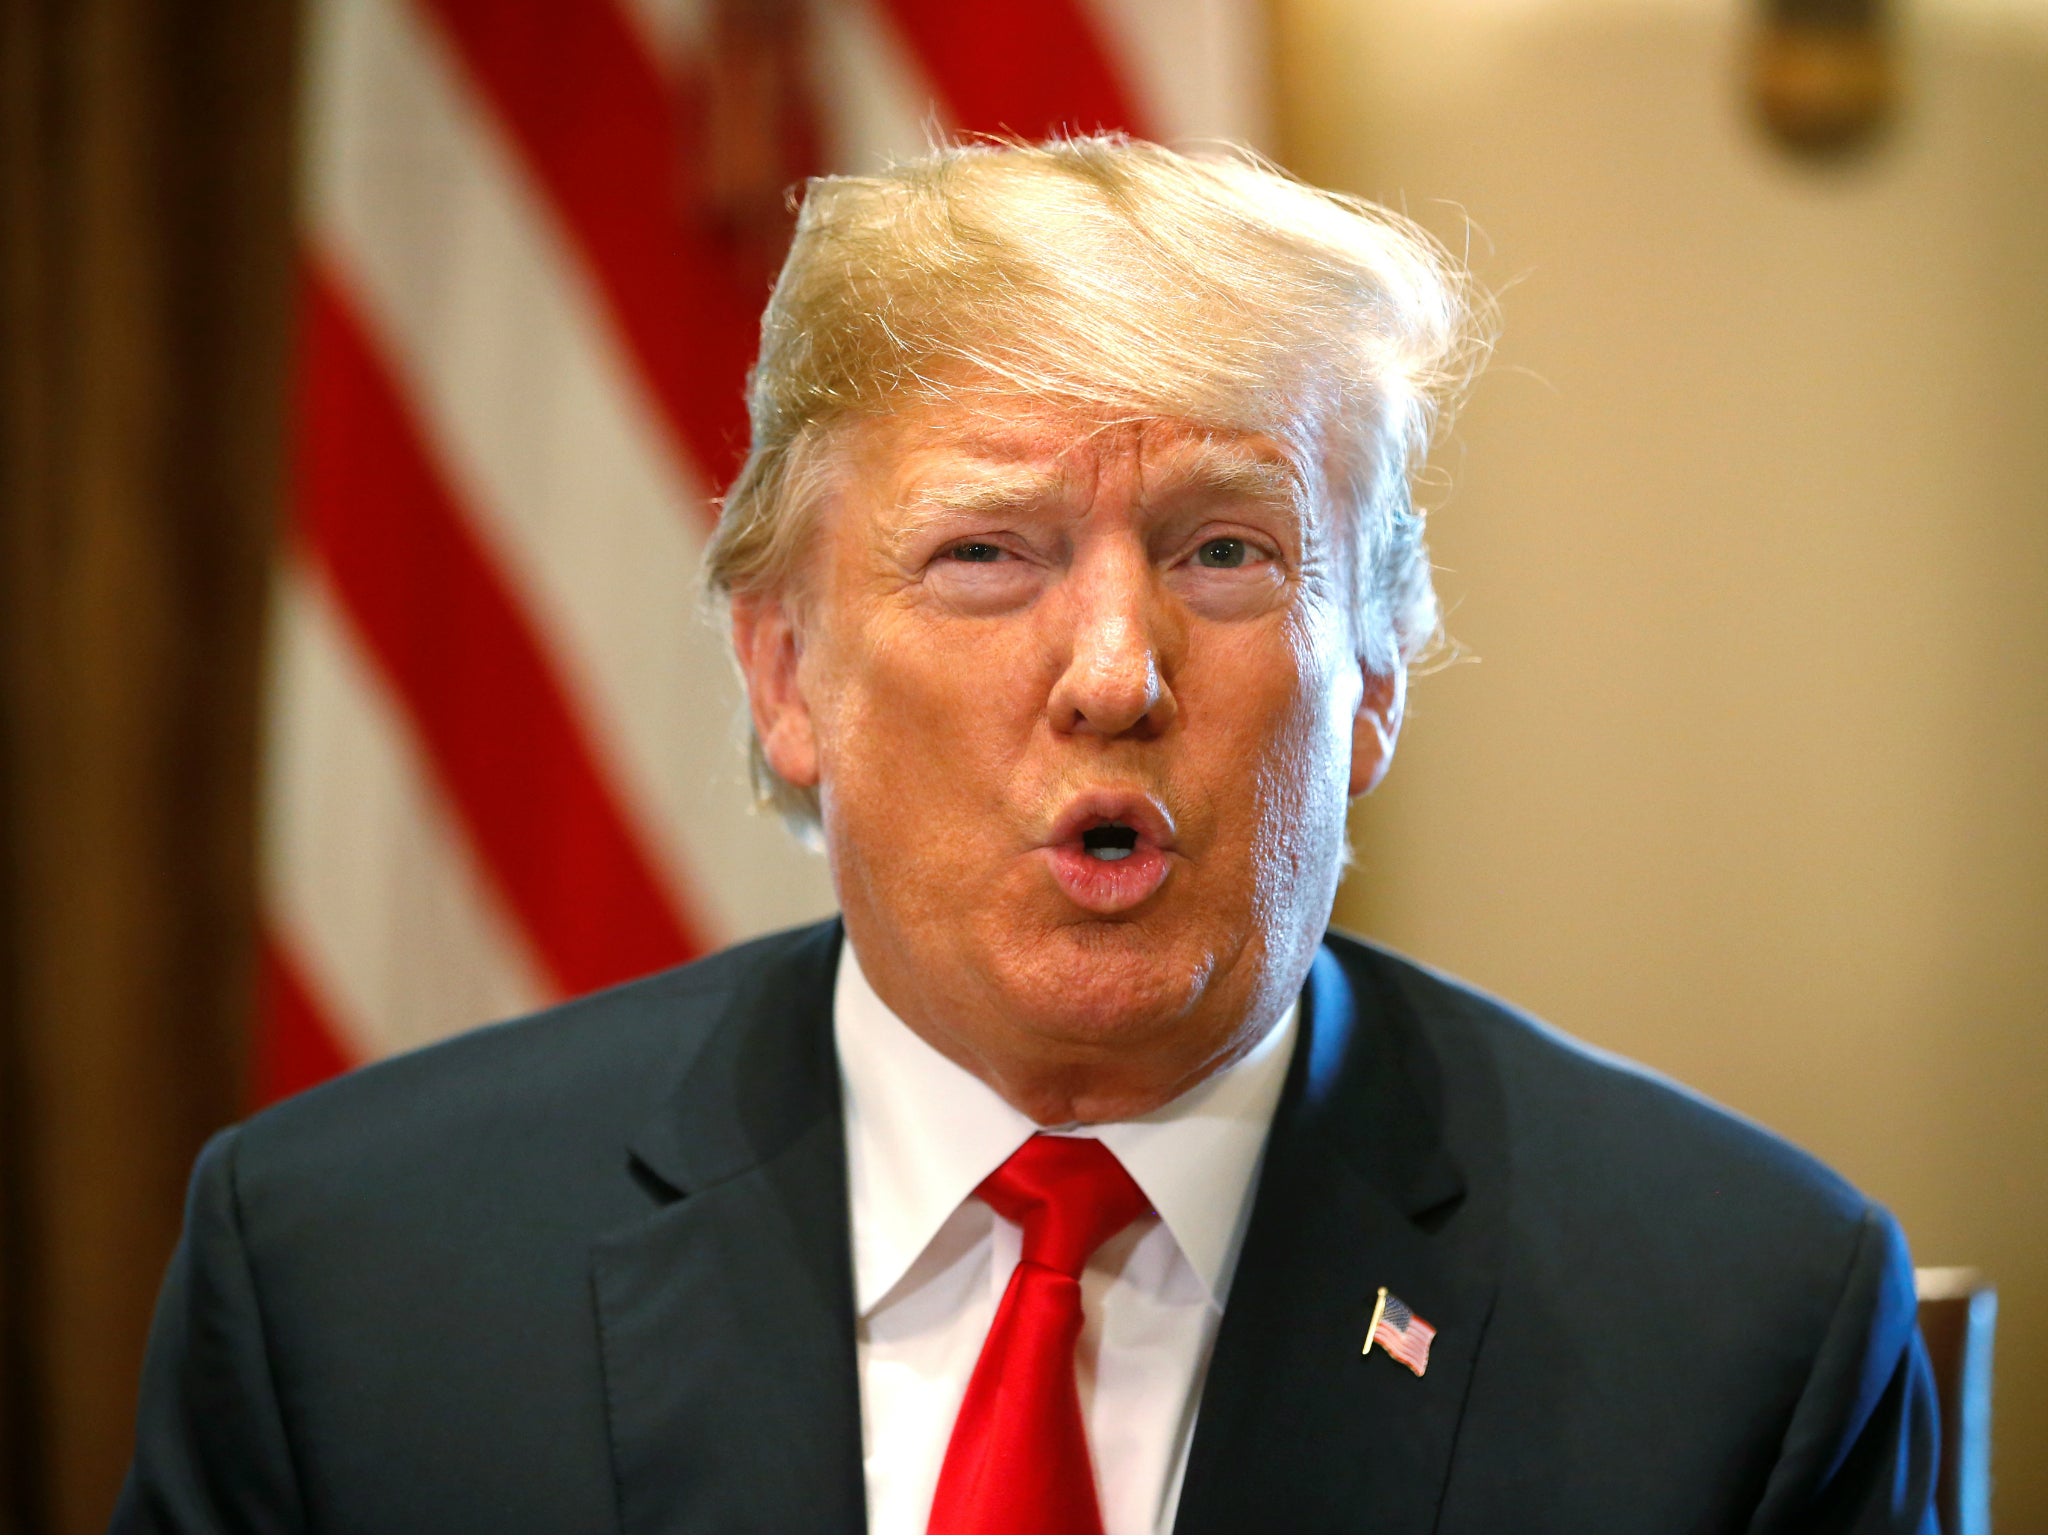 Trump says he will sign &apos;something in a little while&apos; about family separation at border